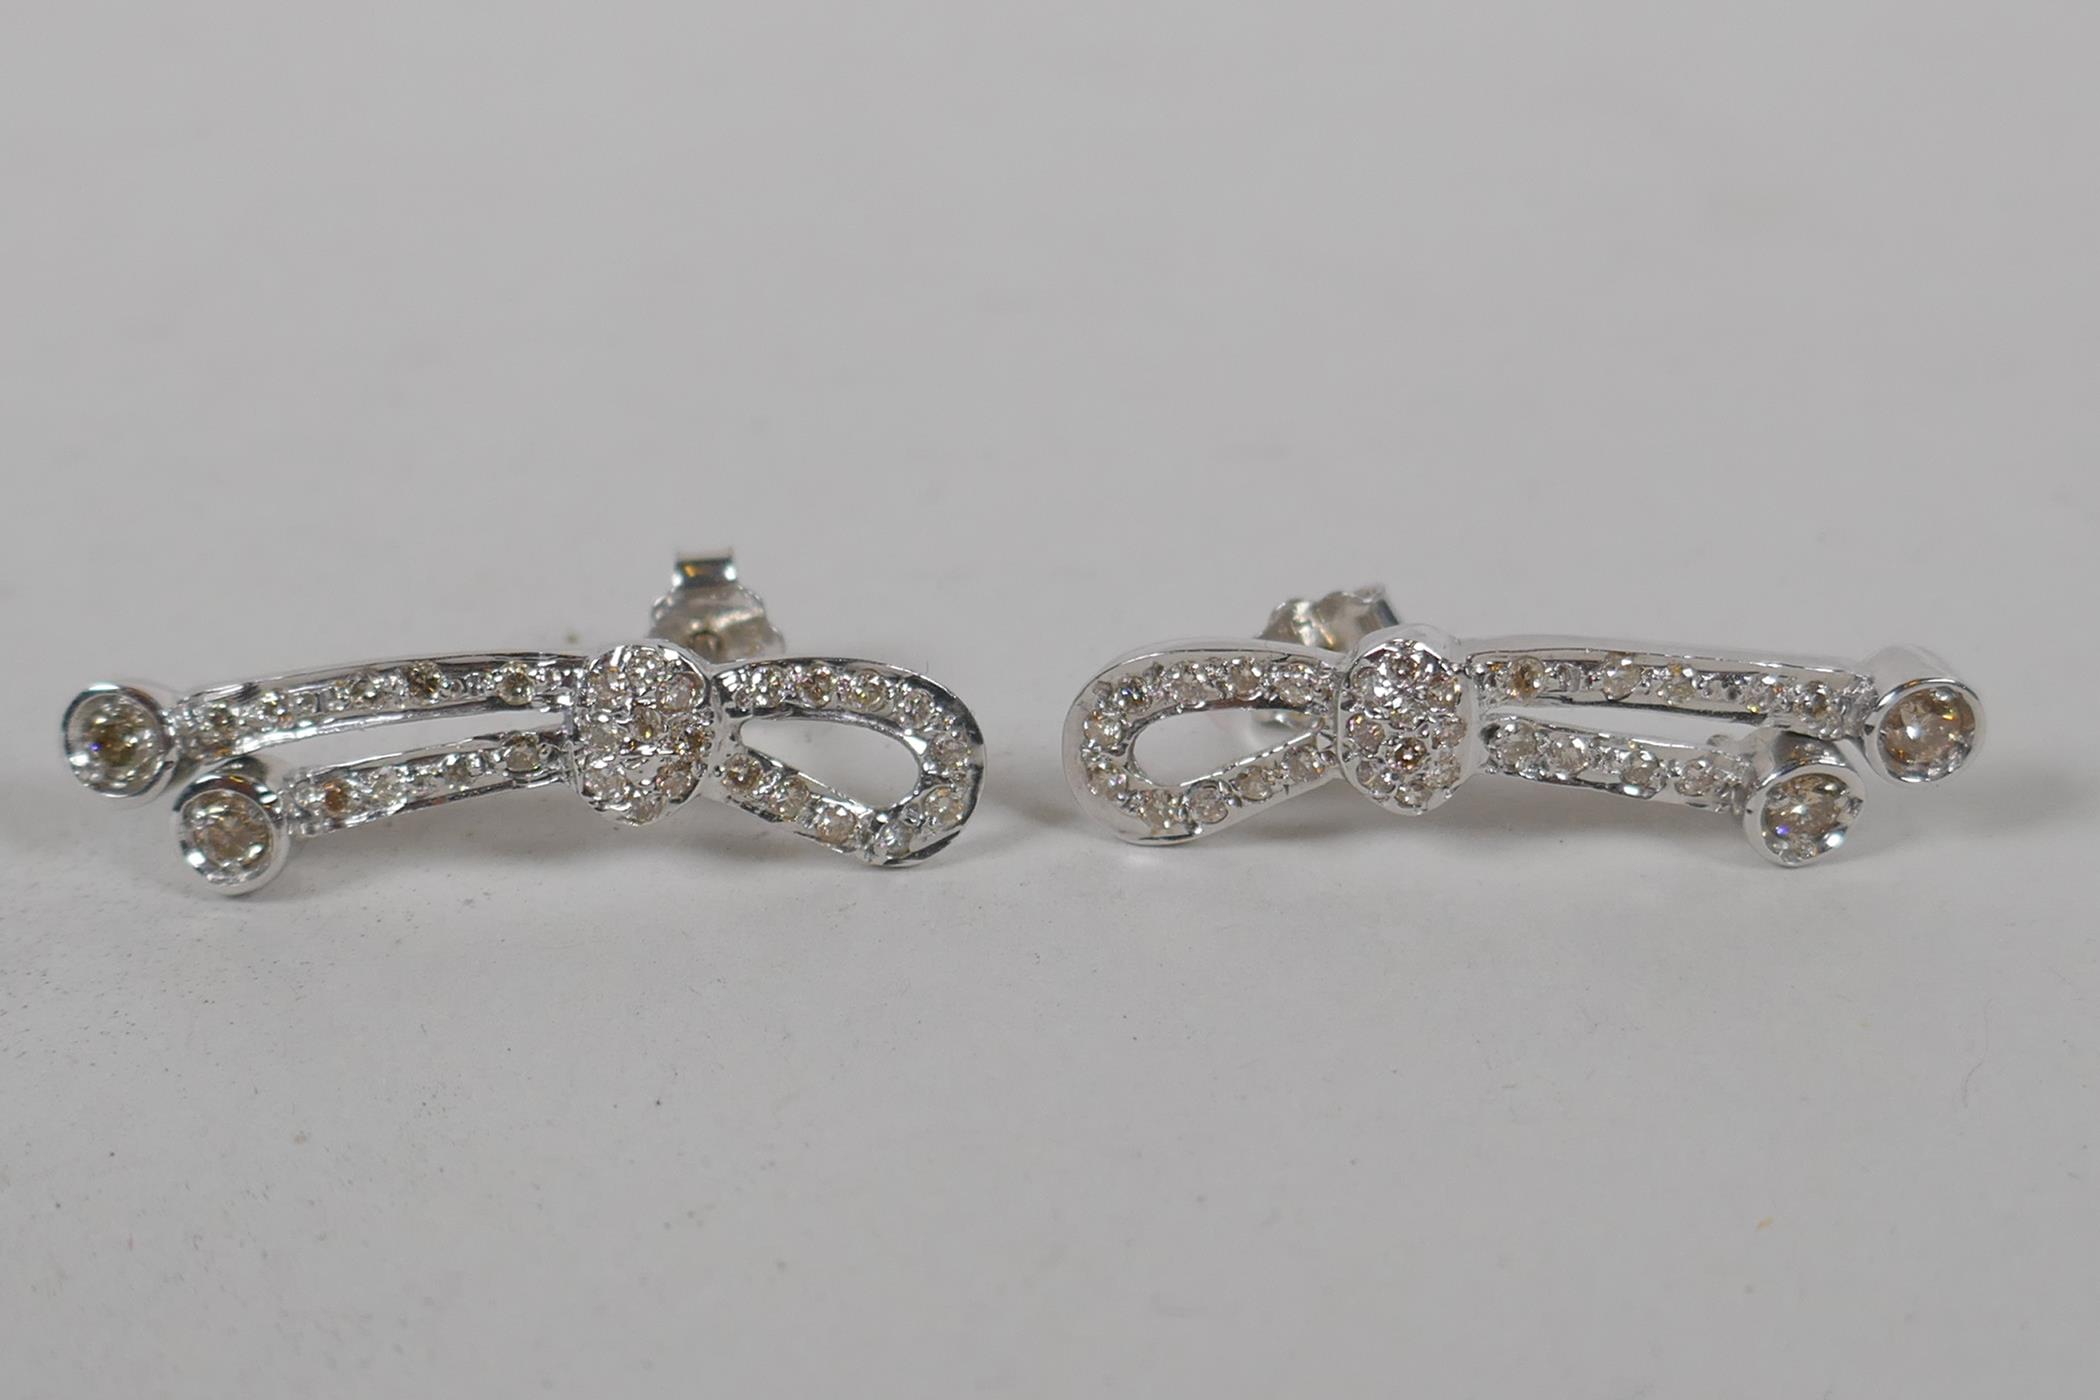 A pair of Iranian white gold and diamond set earrings, indistinctly marked, gold untested, 5.3g